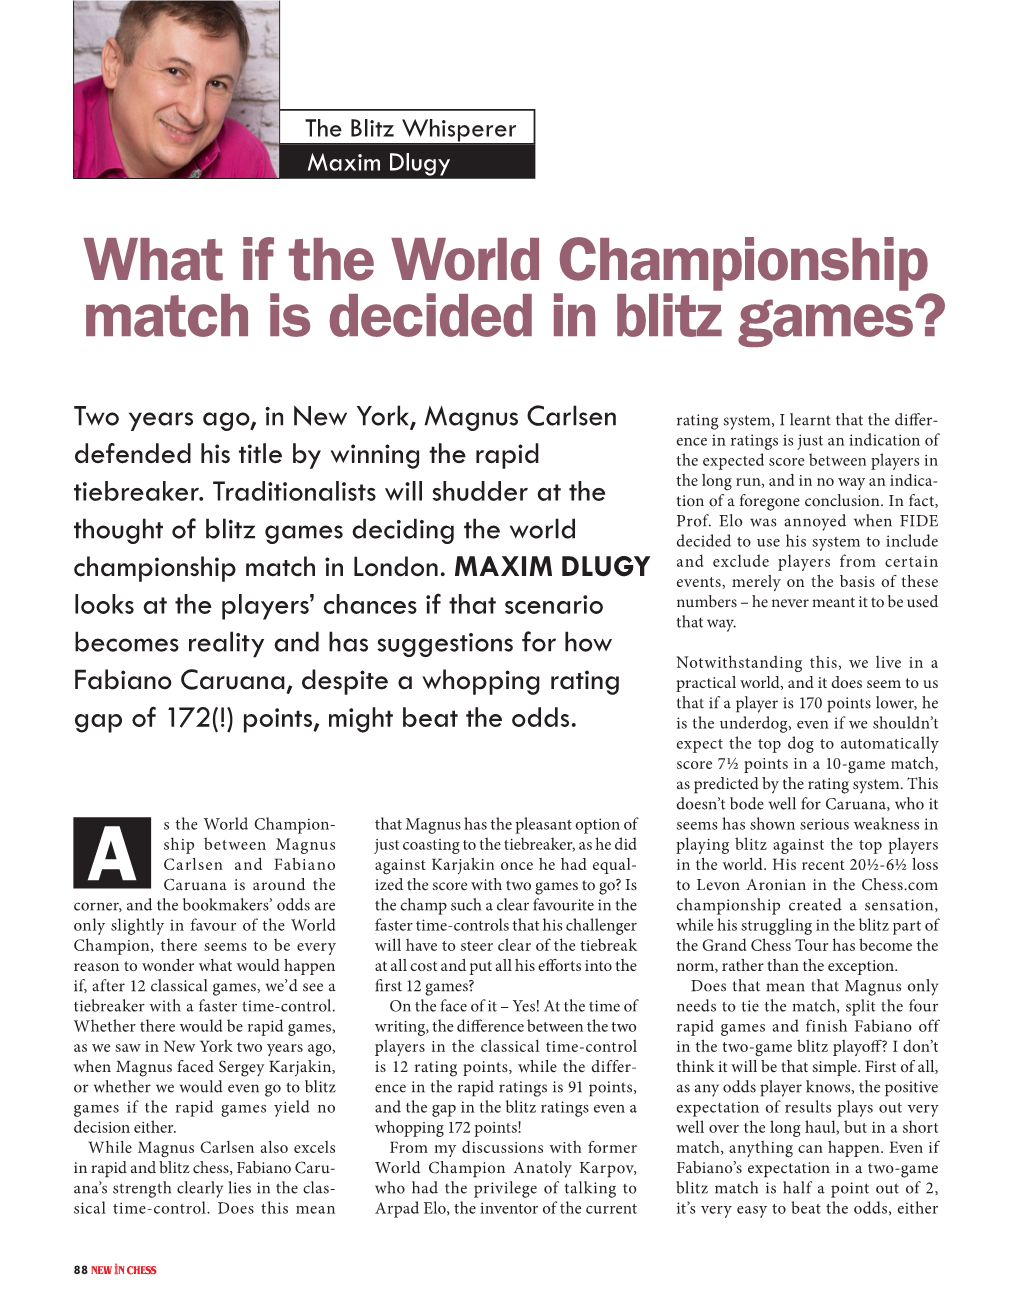 What If the World Championship Match Is Decided in Blitz Games?